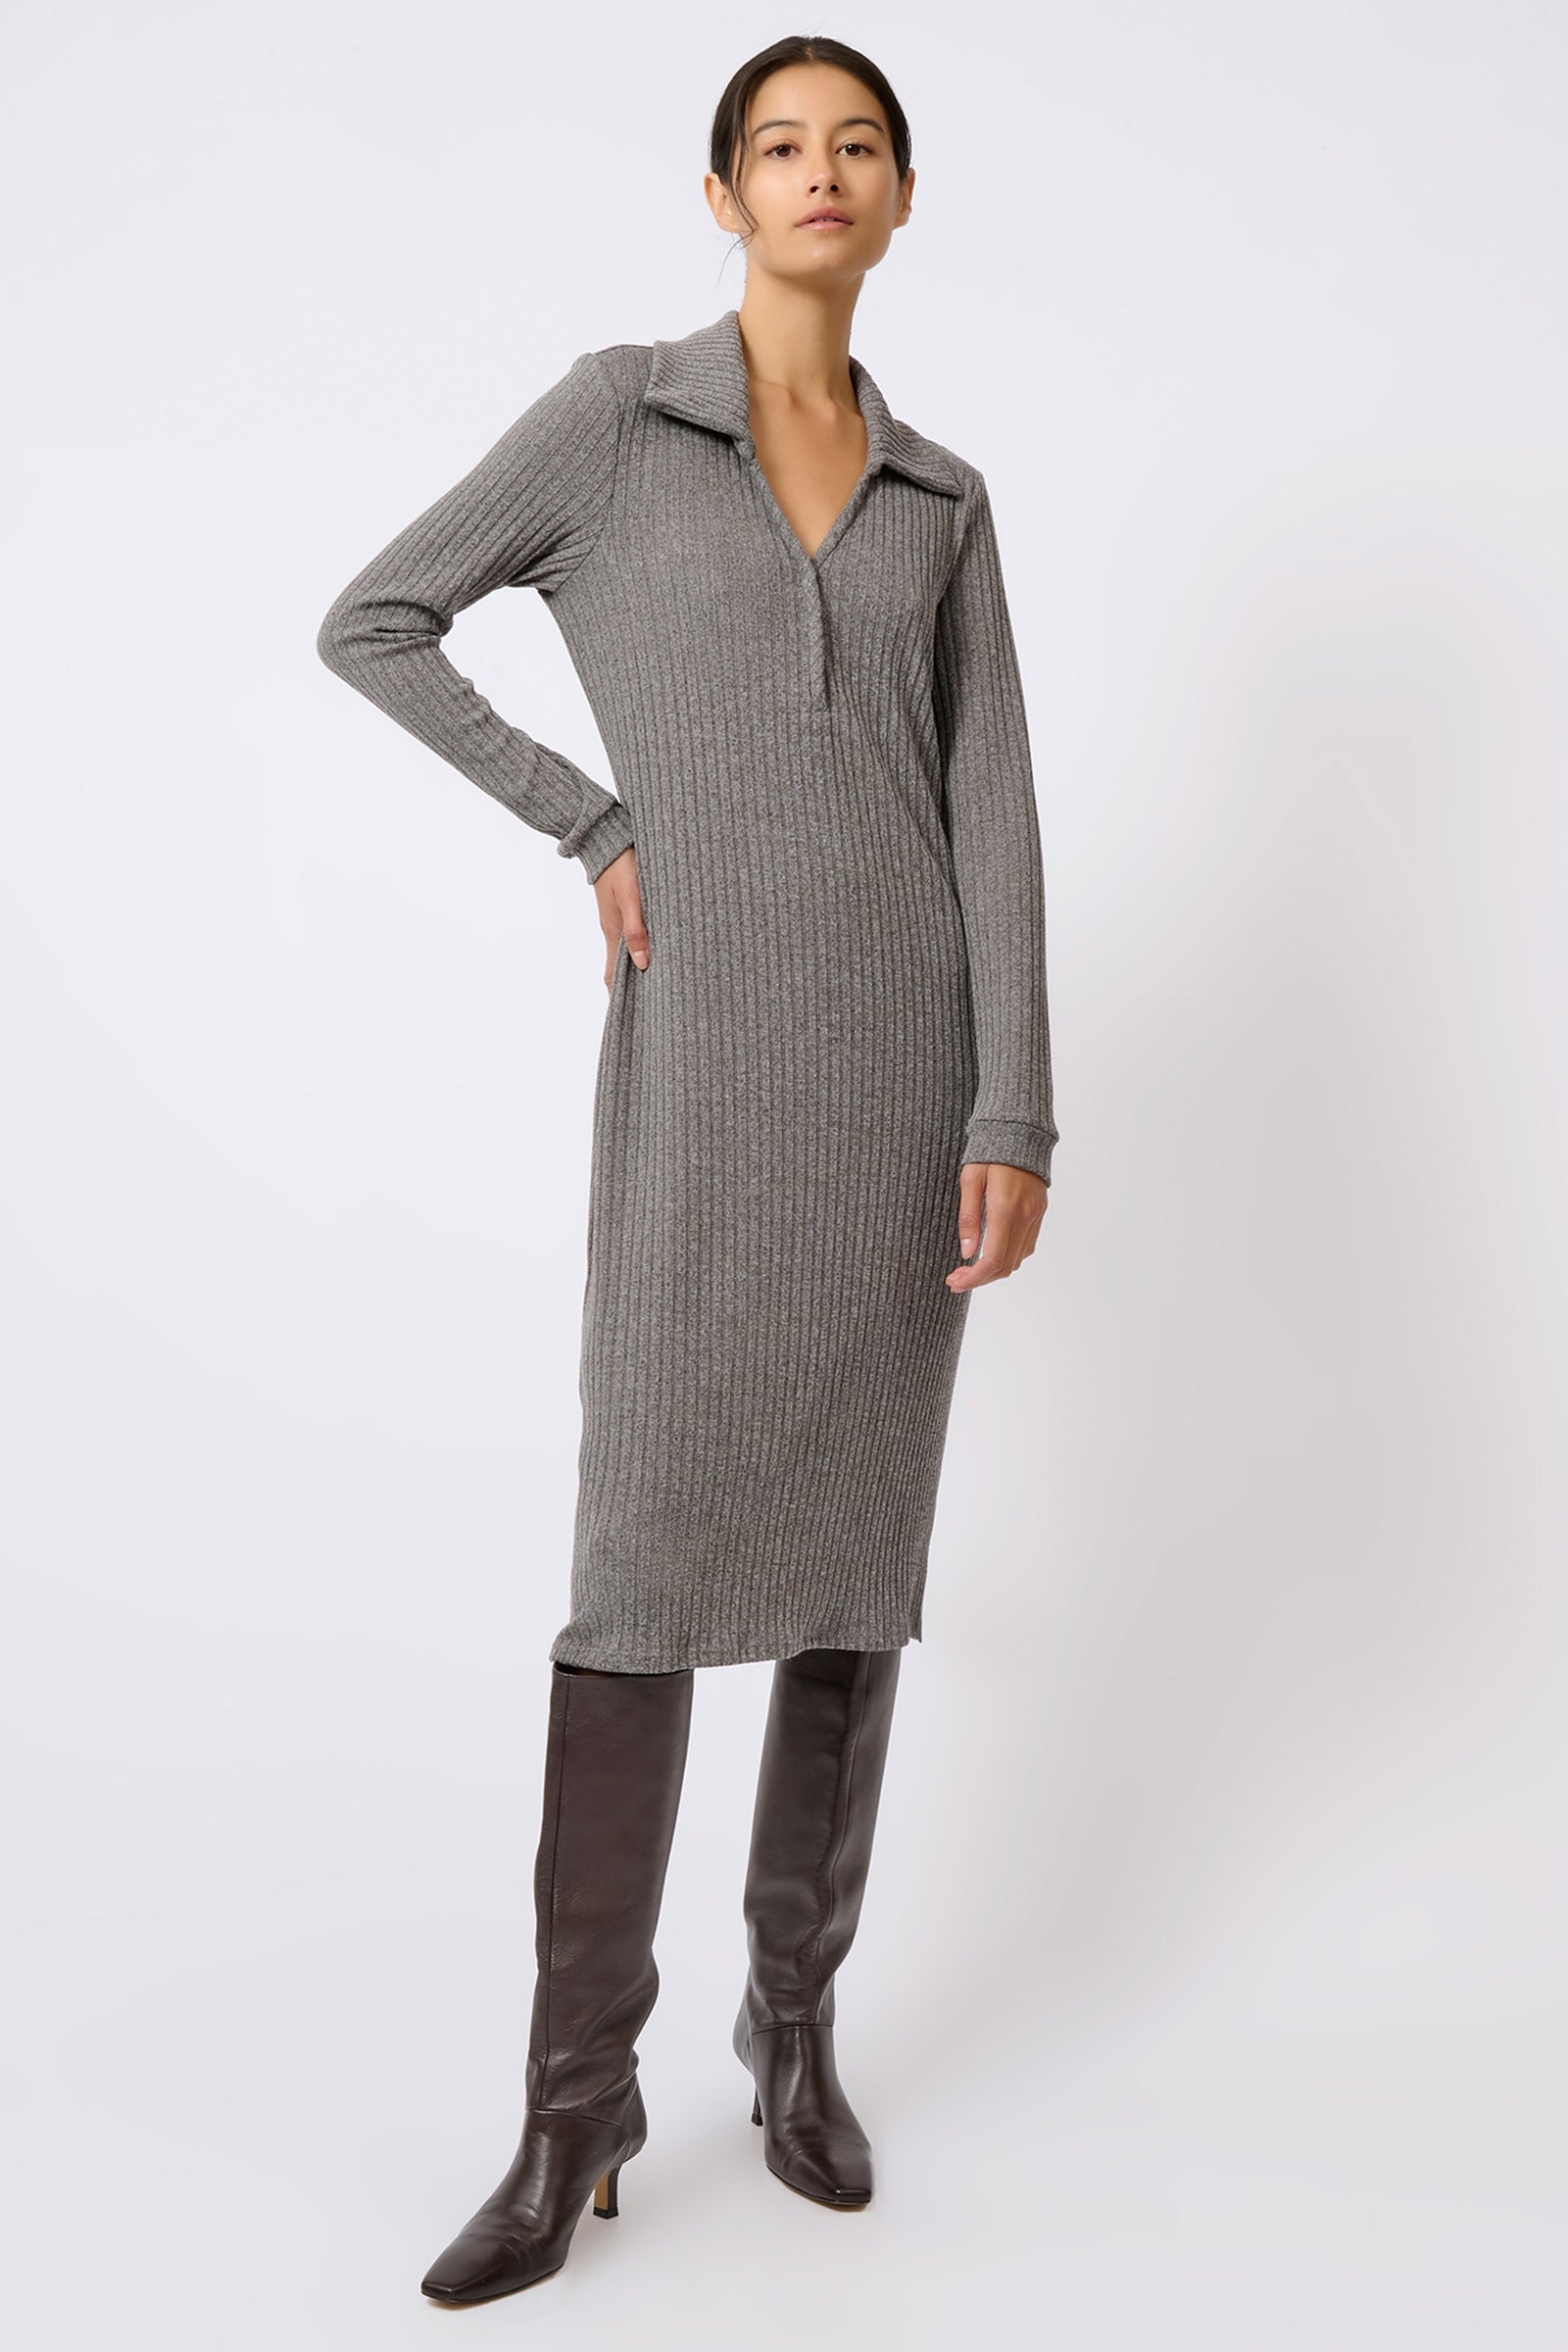 Kal Rieman Audrey Collared Rib Dress in Charcoal on Model with Hand on Hip Full Front View